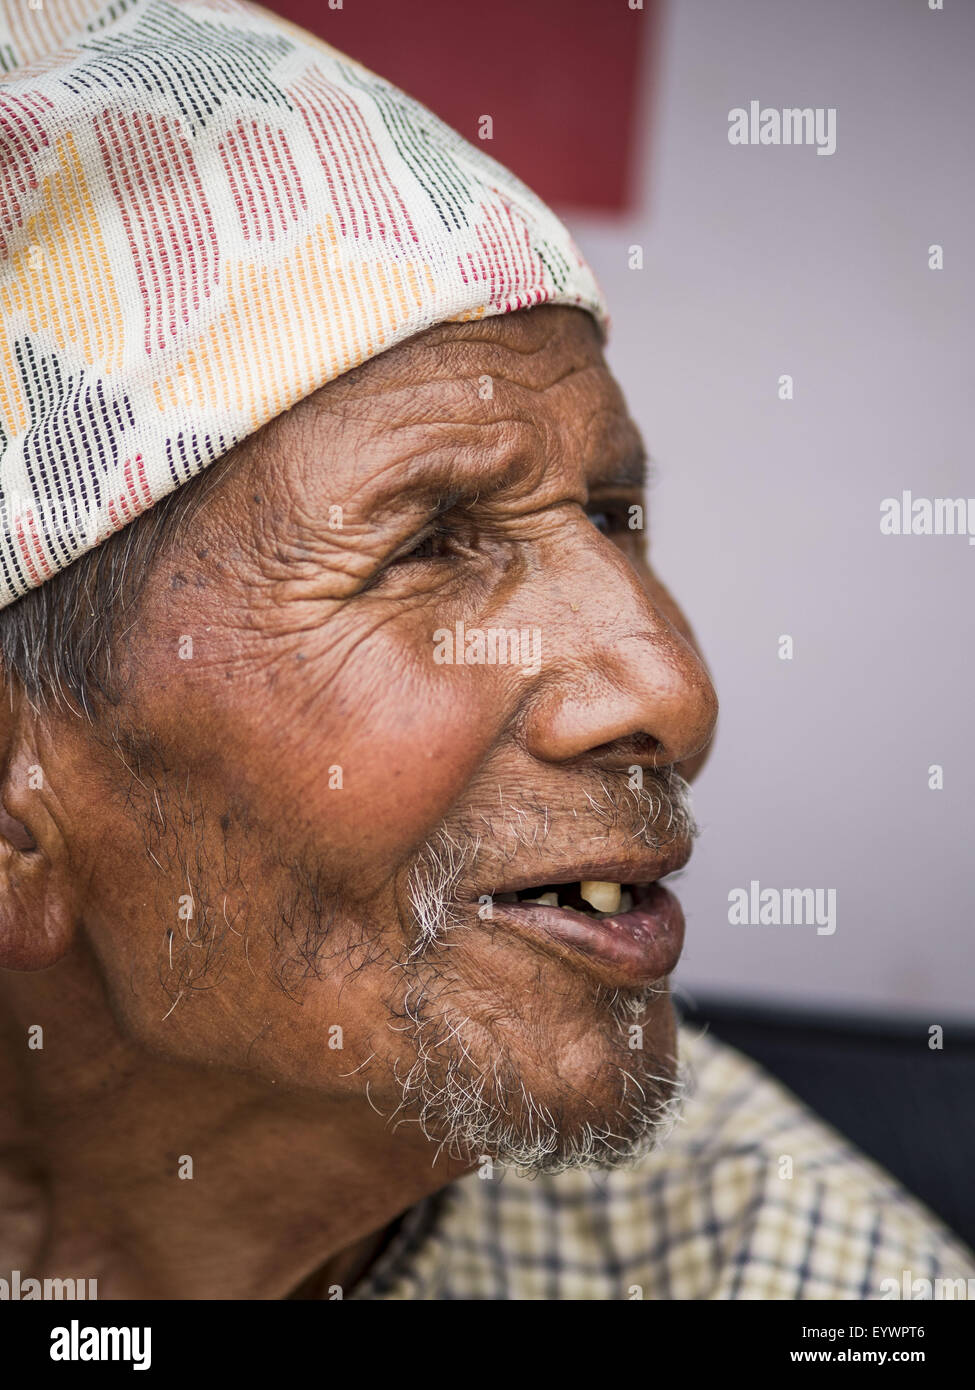 Bhaktapur, Central Region, Nepal. 2nd Aug, 2015. A homeless elderly man in a small Internal Displaced Person (IDP) camp at Durbar Square in Bhaktapur for people left homeless by the Nepal earthquake. The Nepal Earthquake on April 25, 2015, (also known as the Gorkha earthquake) killed more than 9,000 people and injured more than 23,000. It had a magnitude of 7.8.  It was the worst natural disaster to strike Nepal since the 1934 Nepal''“Bihar earthquake. © ZUMA Press, Inc./Alamy Live News Stock Photo